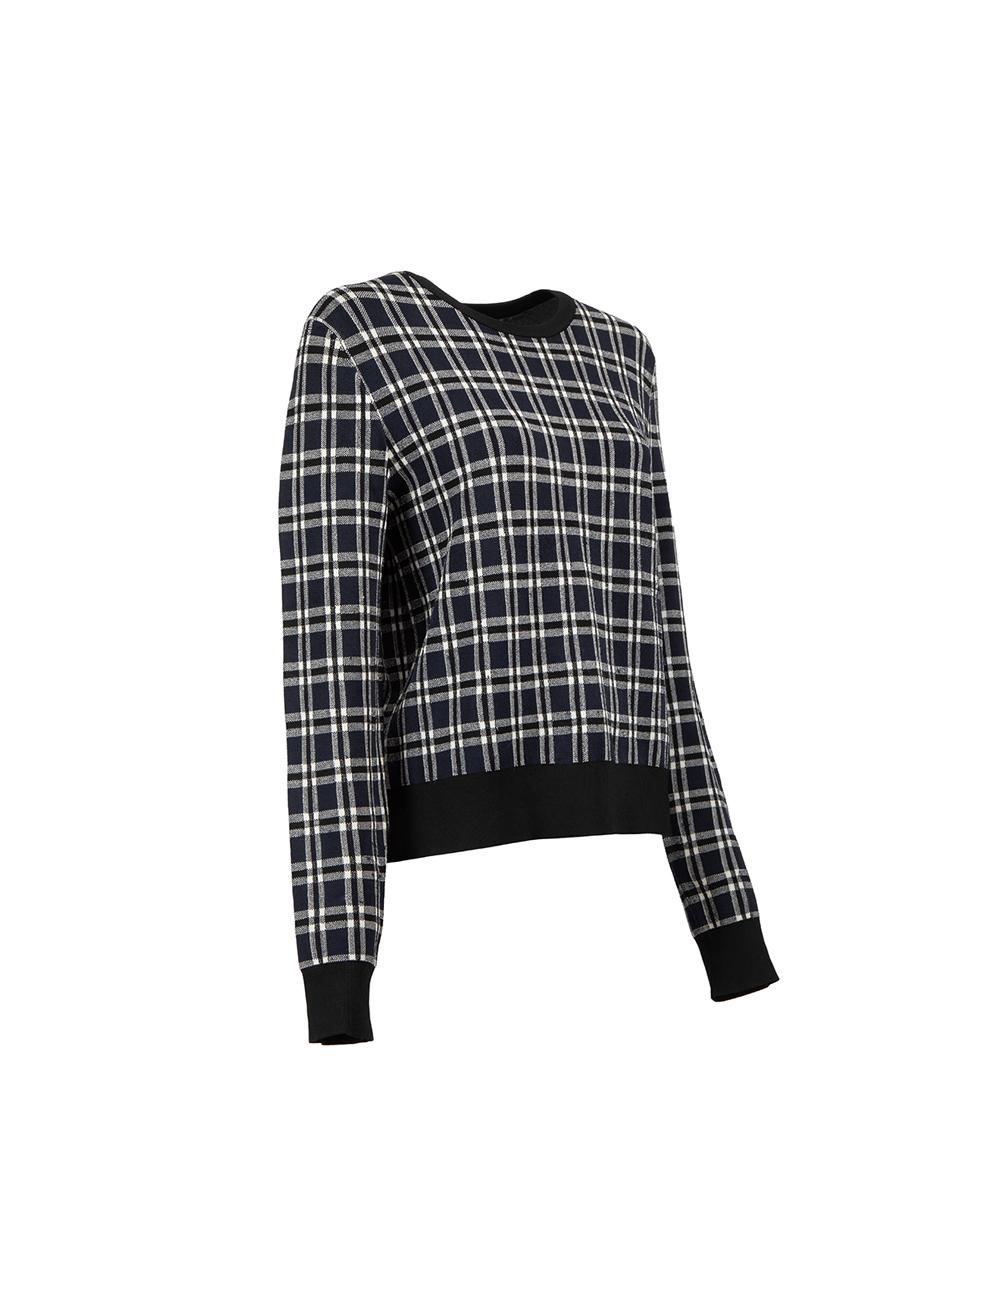 CONDITION is Very good. Minimal wear to jumper is evident. Minor pilling and pulls in fabric over all material on this used A.L.C designer resale item. 



Details


Navy

Synthetic

Long sleeves sweatshirt

Stretchy

Checkered pattern

Round